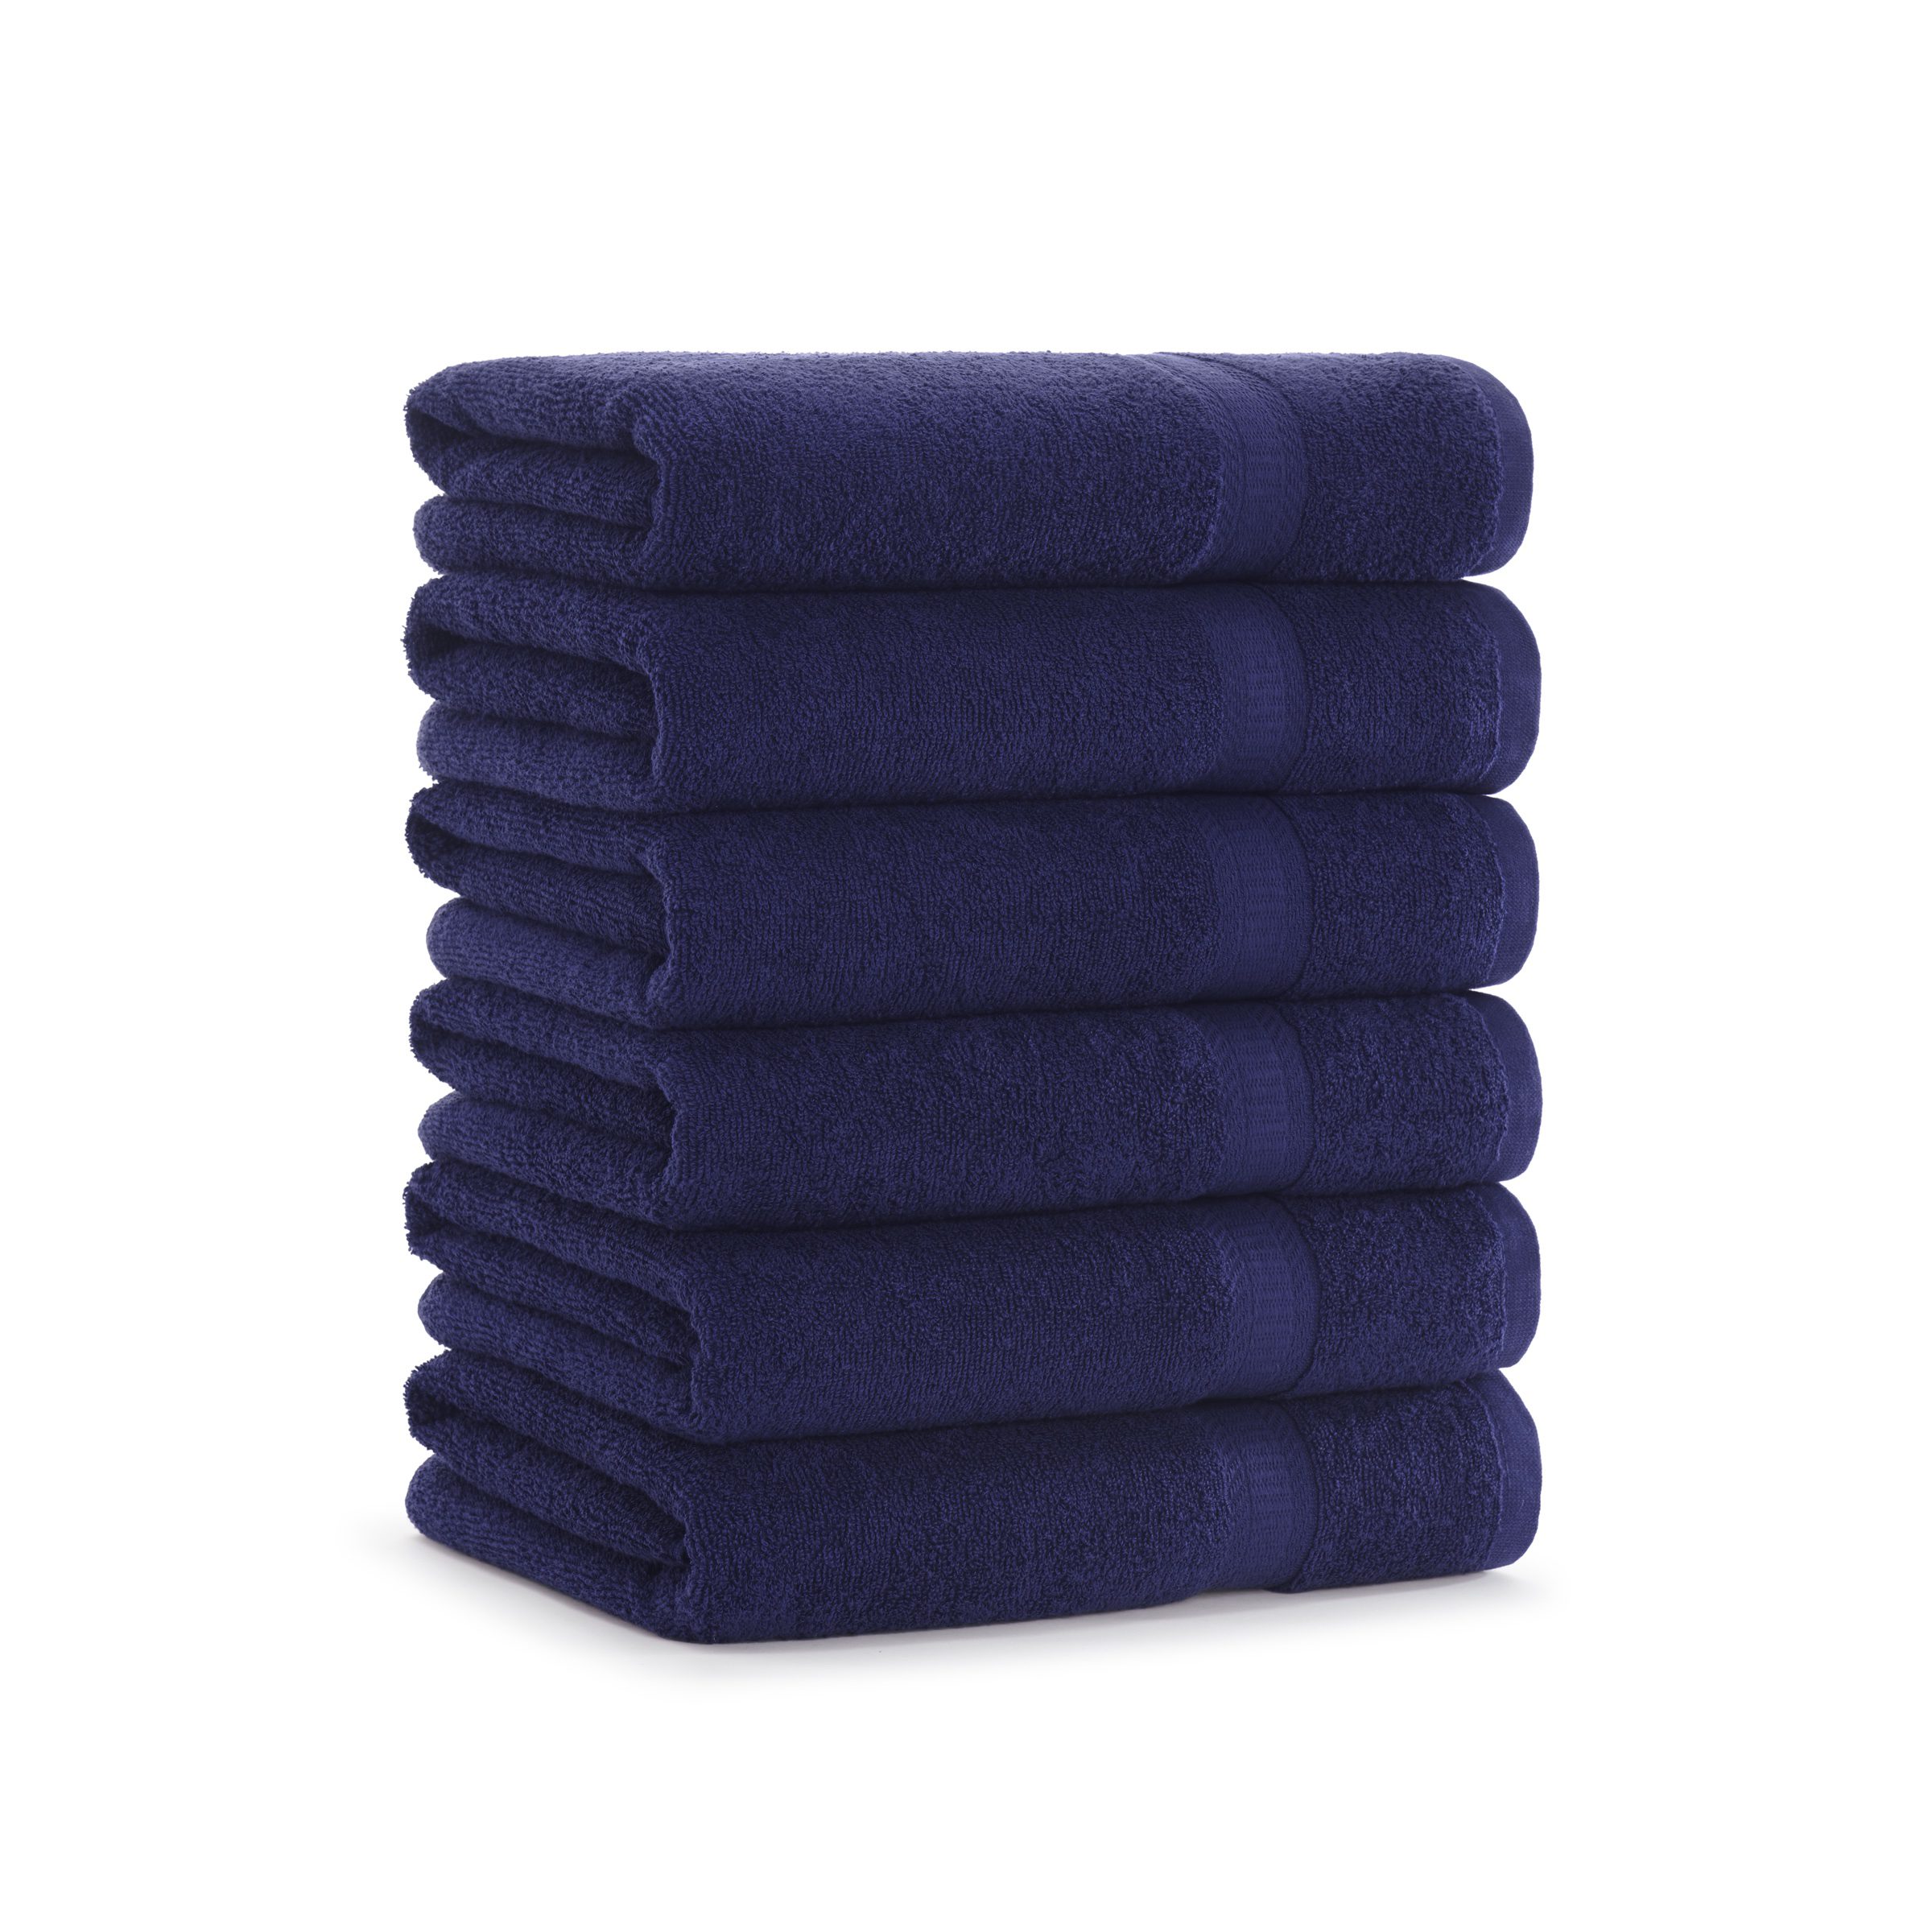 Dropship 100% Cotton 8 Piece Antimicrobial Towel Set to Sell Online at a  Lower Price